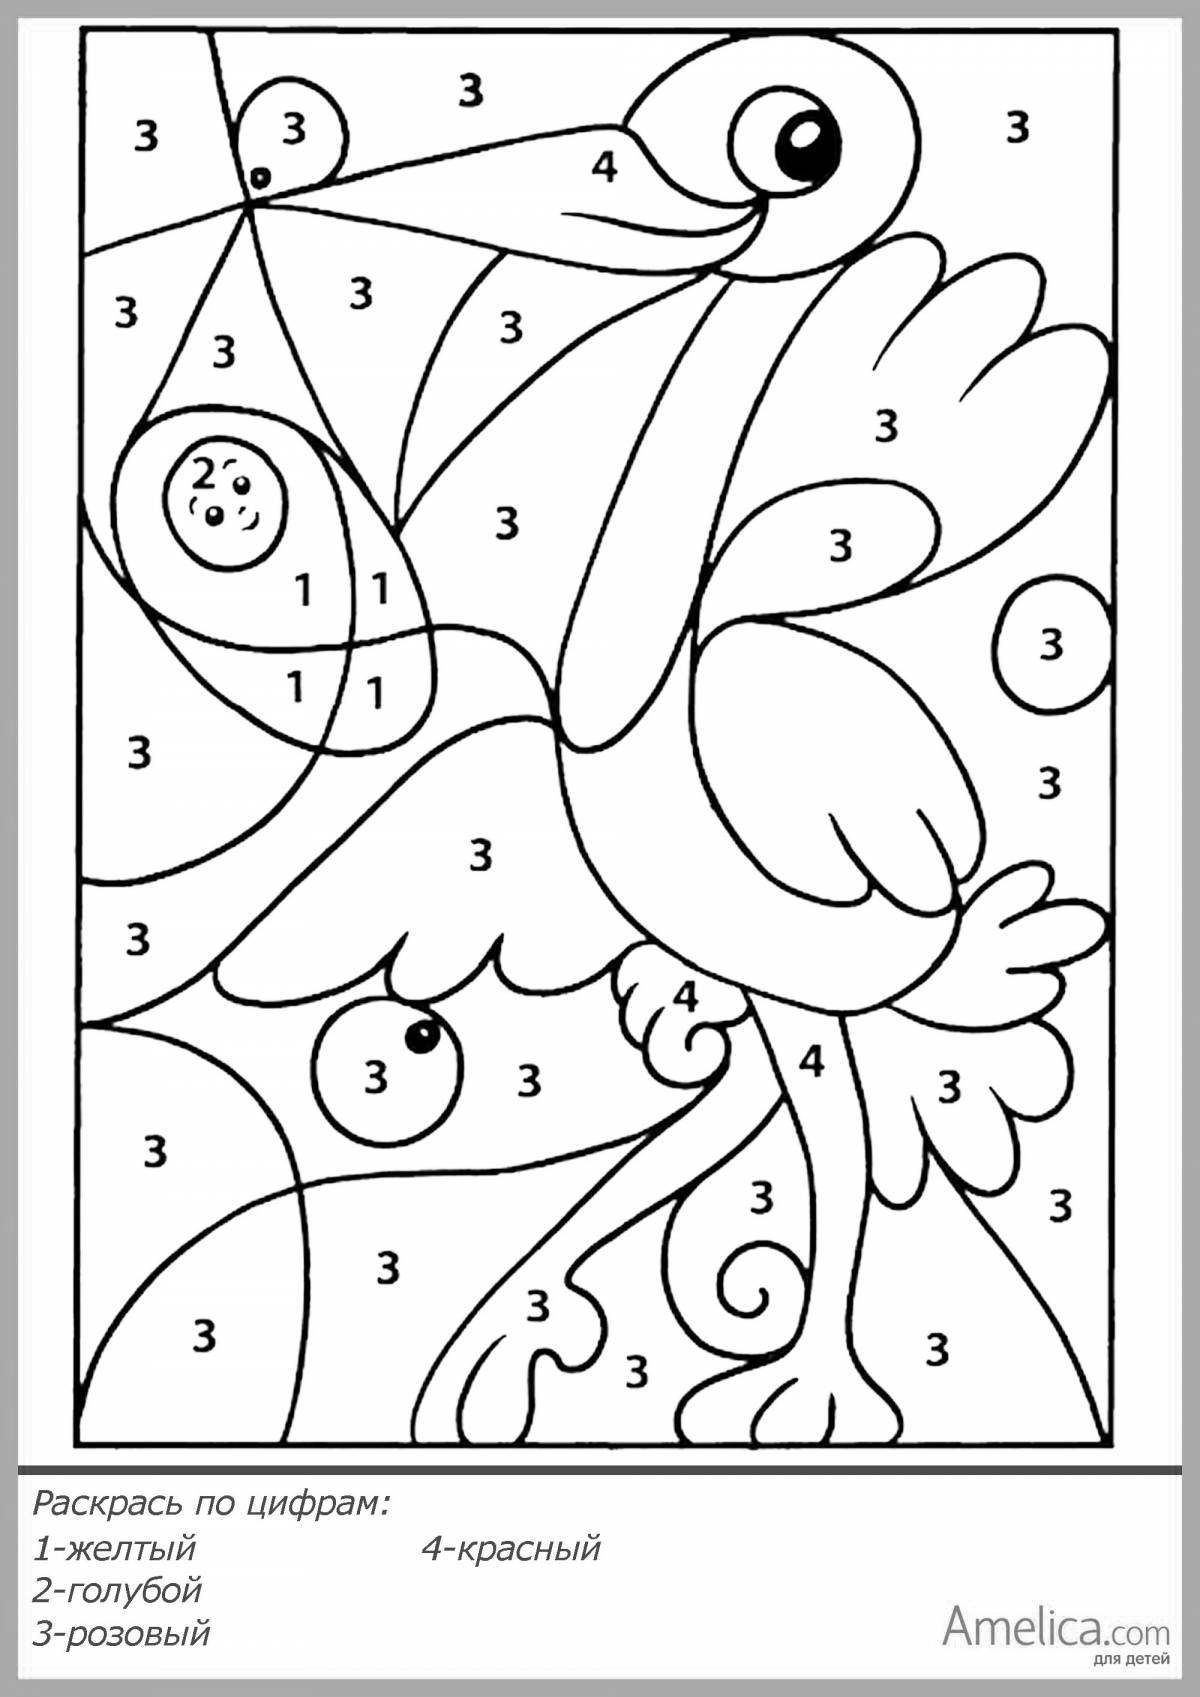 Delightful coloring book, small in numbers